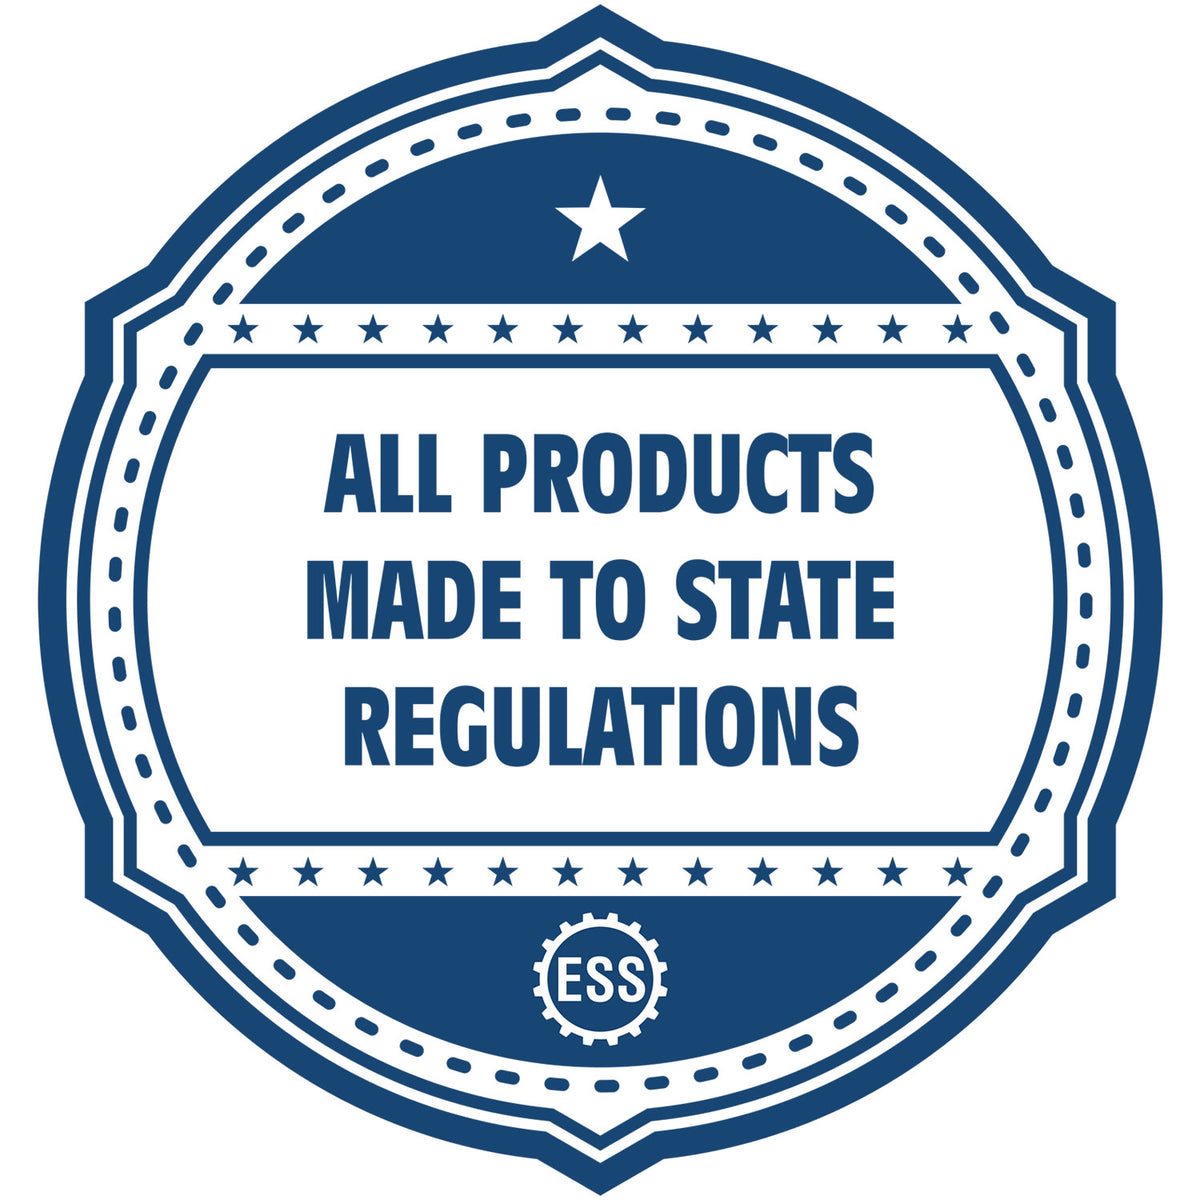 An icon or badge element for the PSI Connecticut Notary Stamp showing that this product is made in compliance with state regulations.